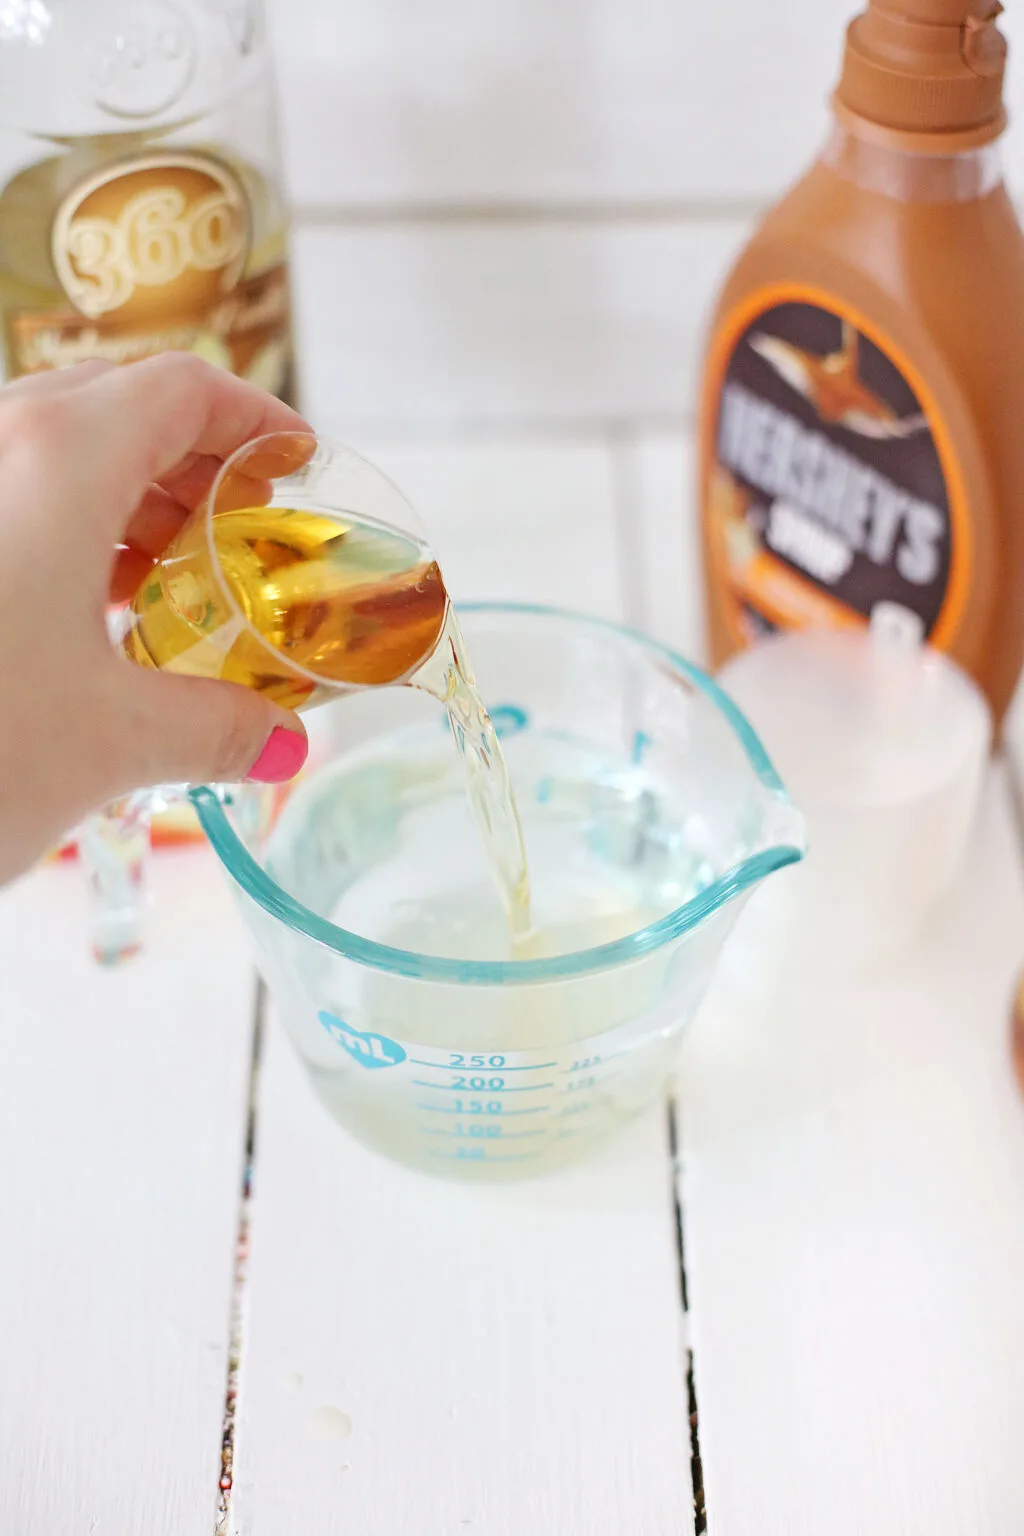 alcohol being poured into jello mixture